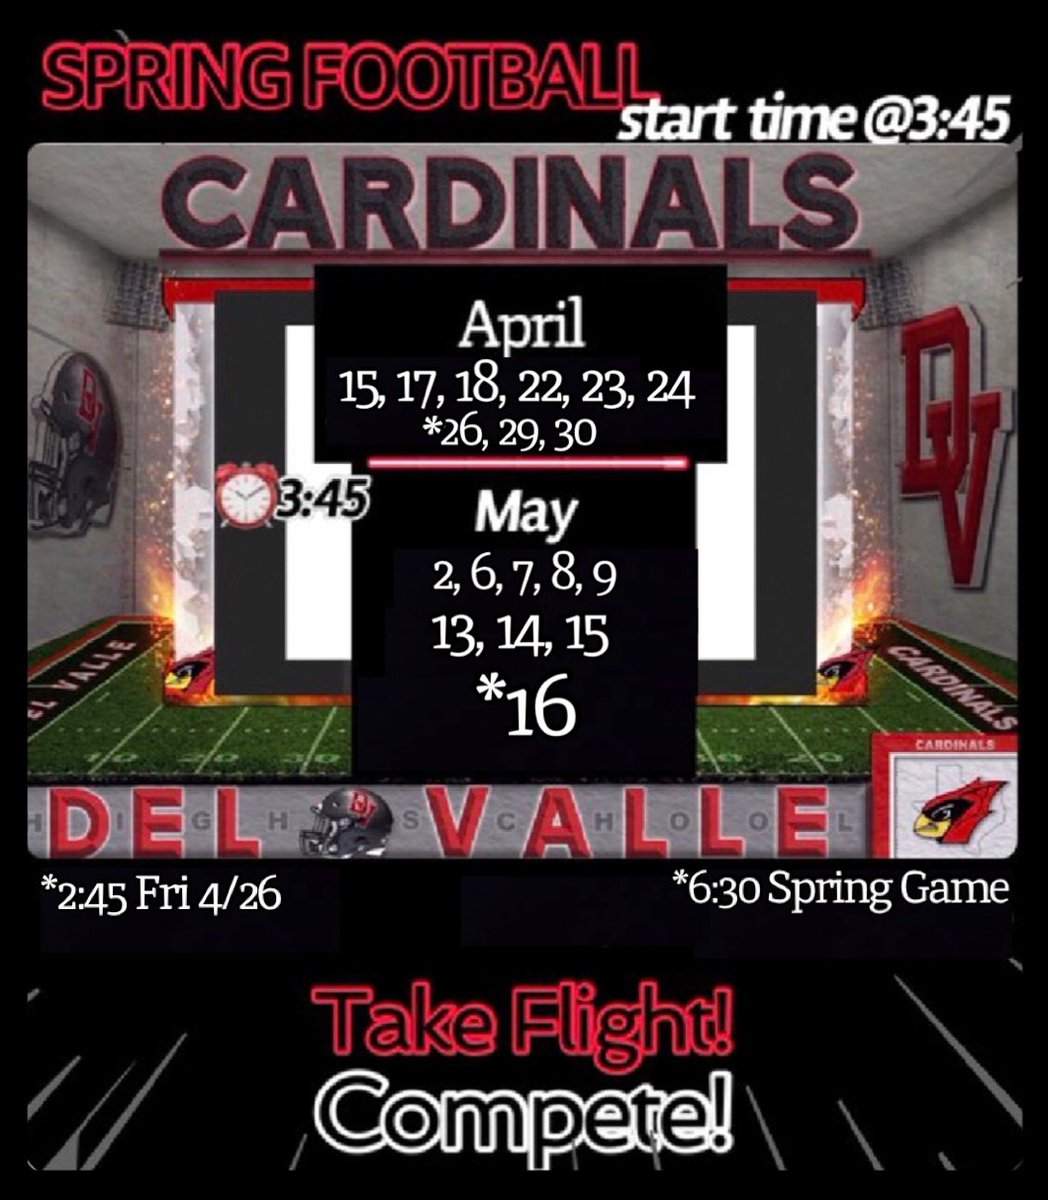 Spring is here🍿 Got some Dudes for all levels! FBS, FCS, D2, D3, NAIA...❗️ 🏈Period starts at 3:45 Every day Mon-Thurs (every Fri, period starts at 2:45) #RecruitDV🔴 Always Got Athletes! @DVCardinalsFB @jrock44rt @julio_ramirezz1 @Freddie_T22 @truley_number6 @Demari_Hunt